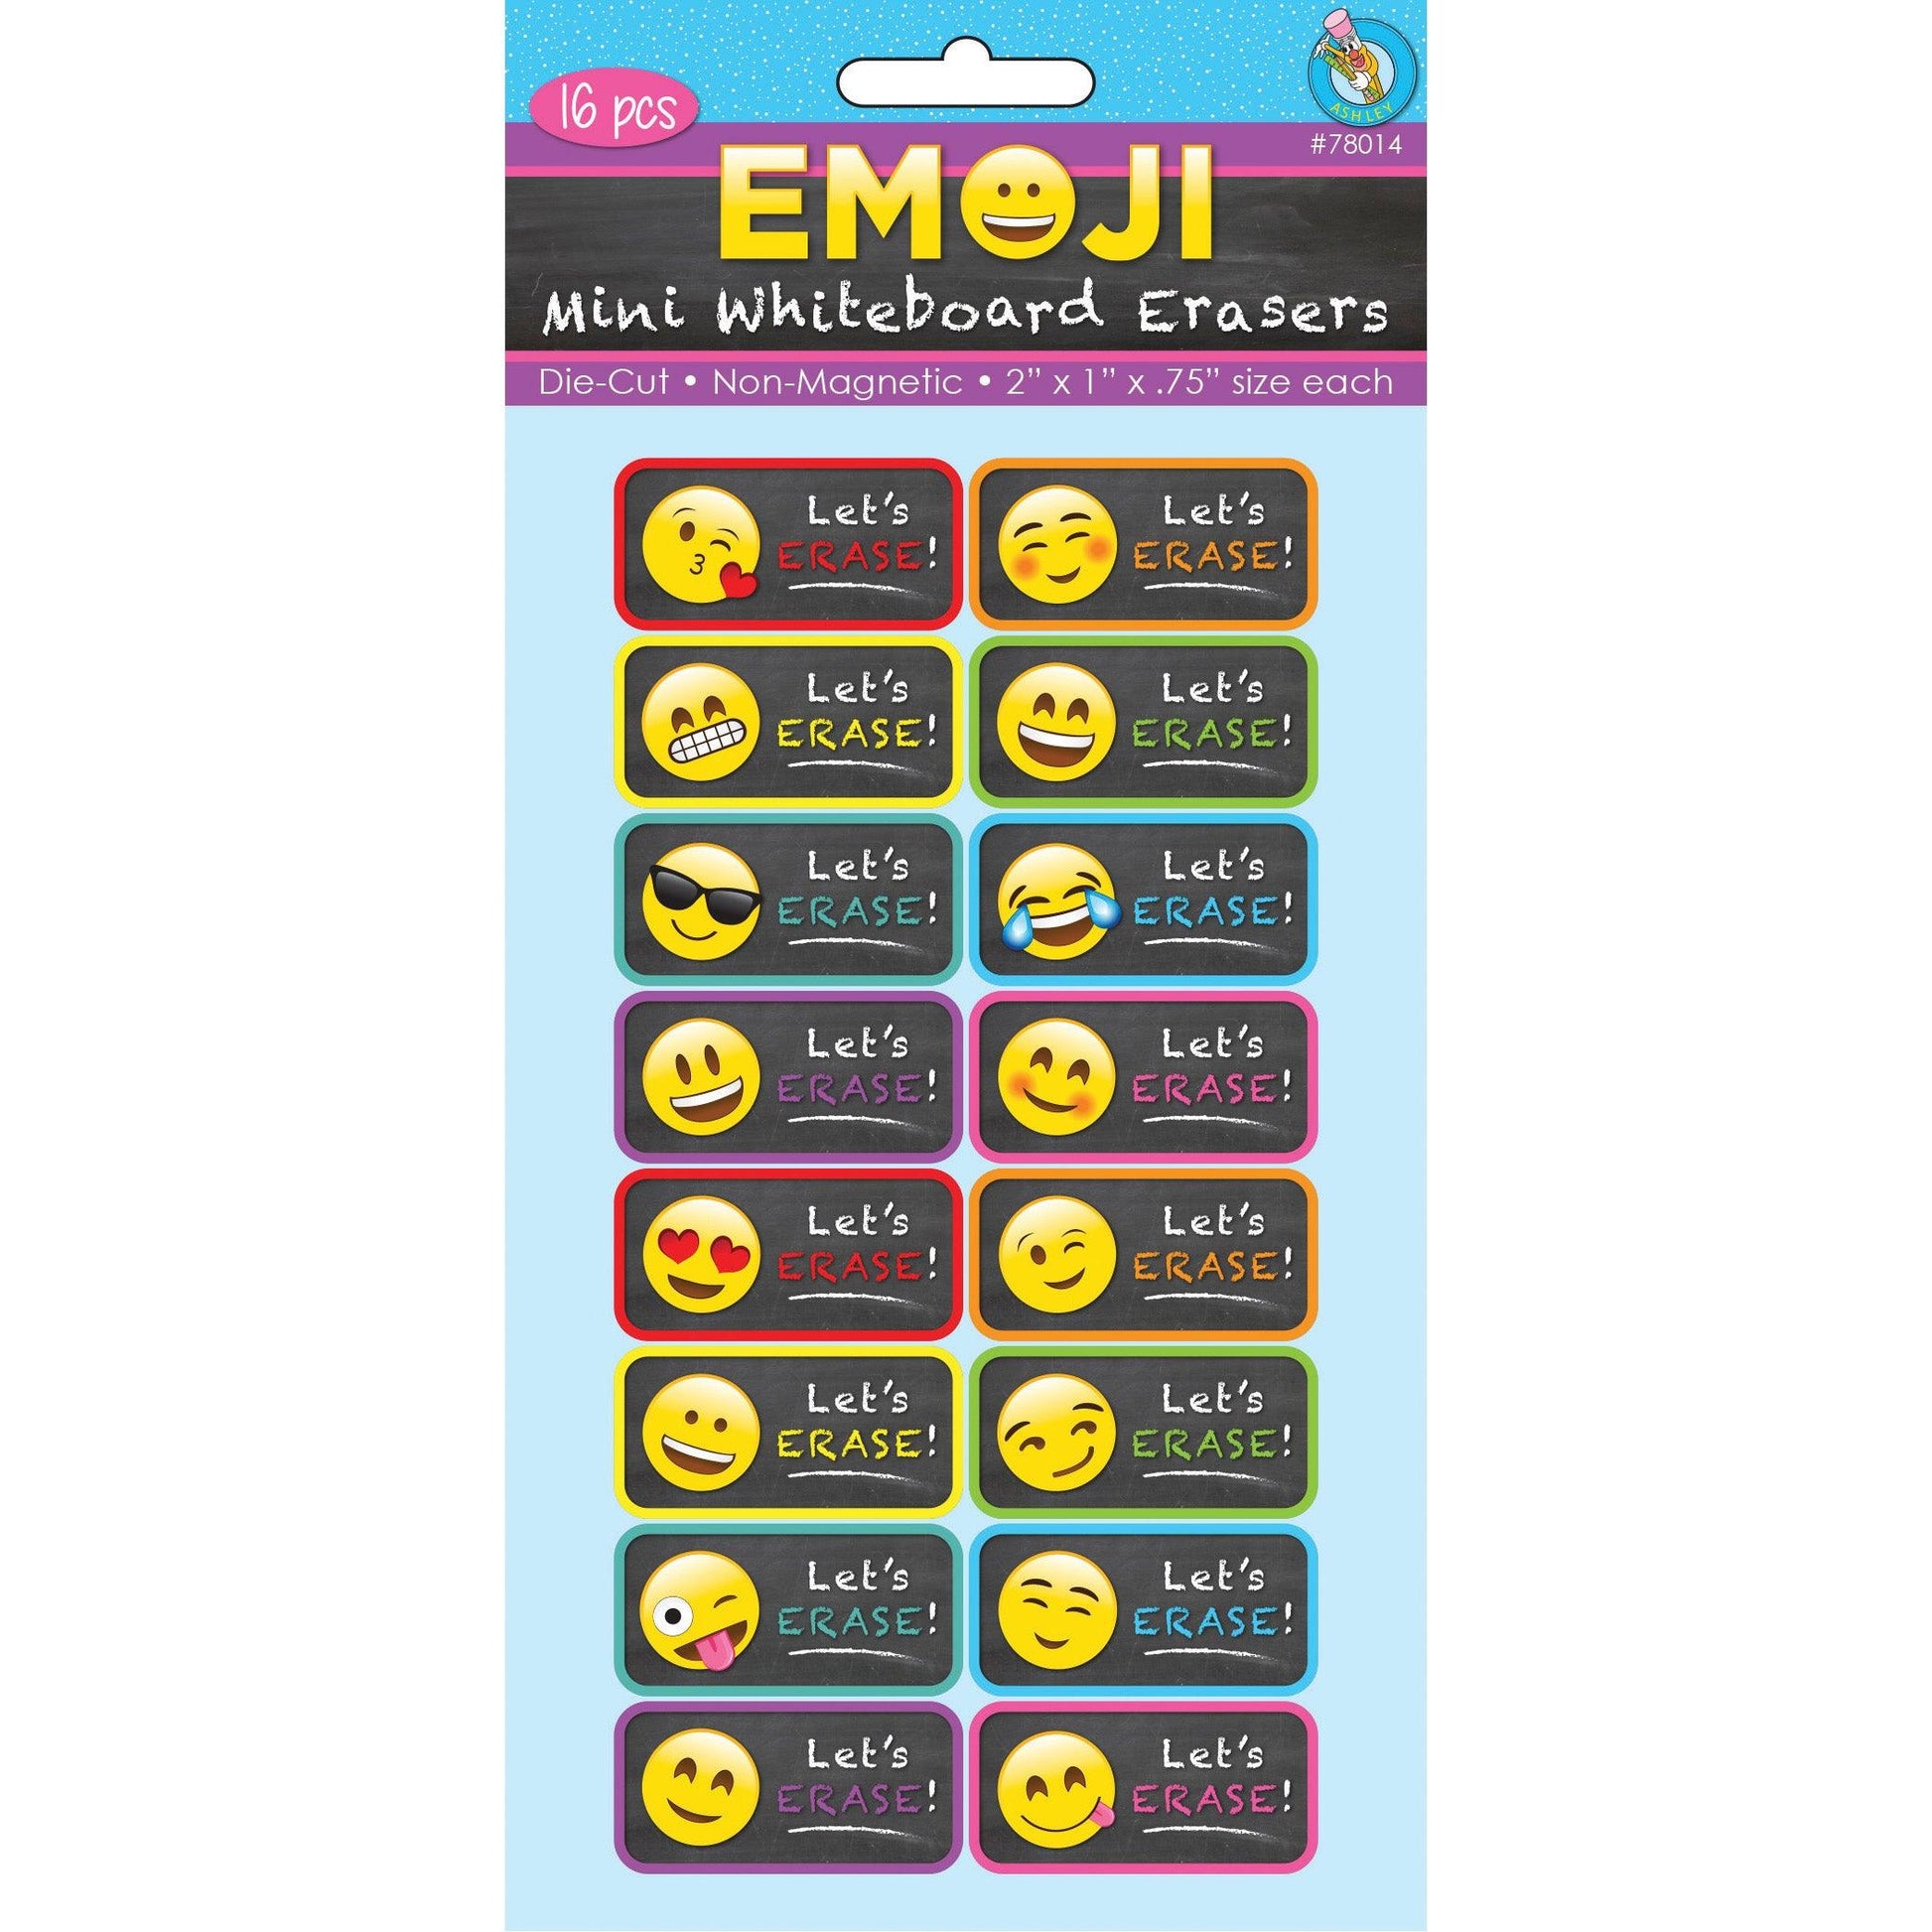 Non-Magnetic Mini Whiteboard Erasers, Emotions Icons, Pack of 16 - Loomini